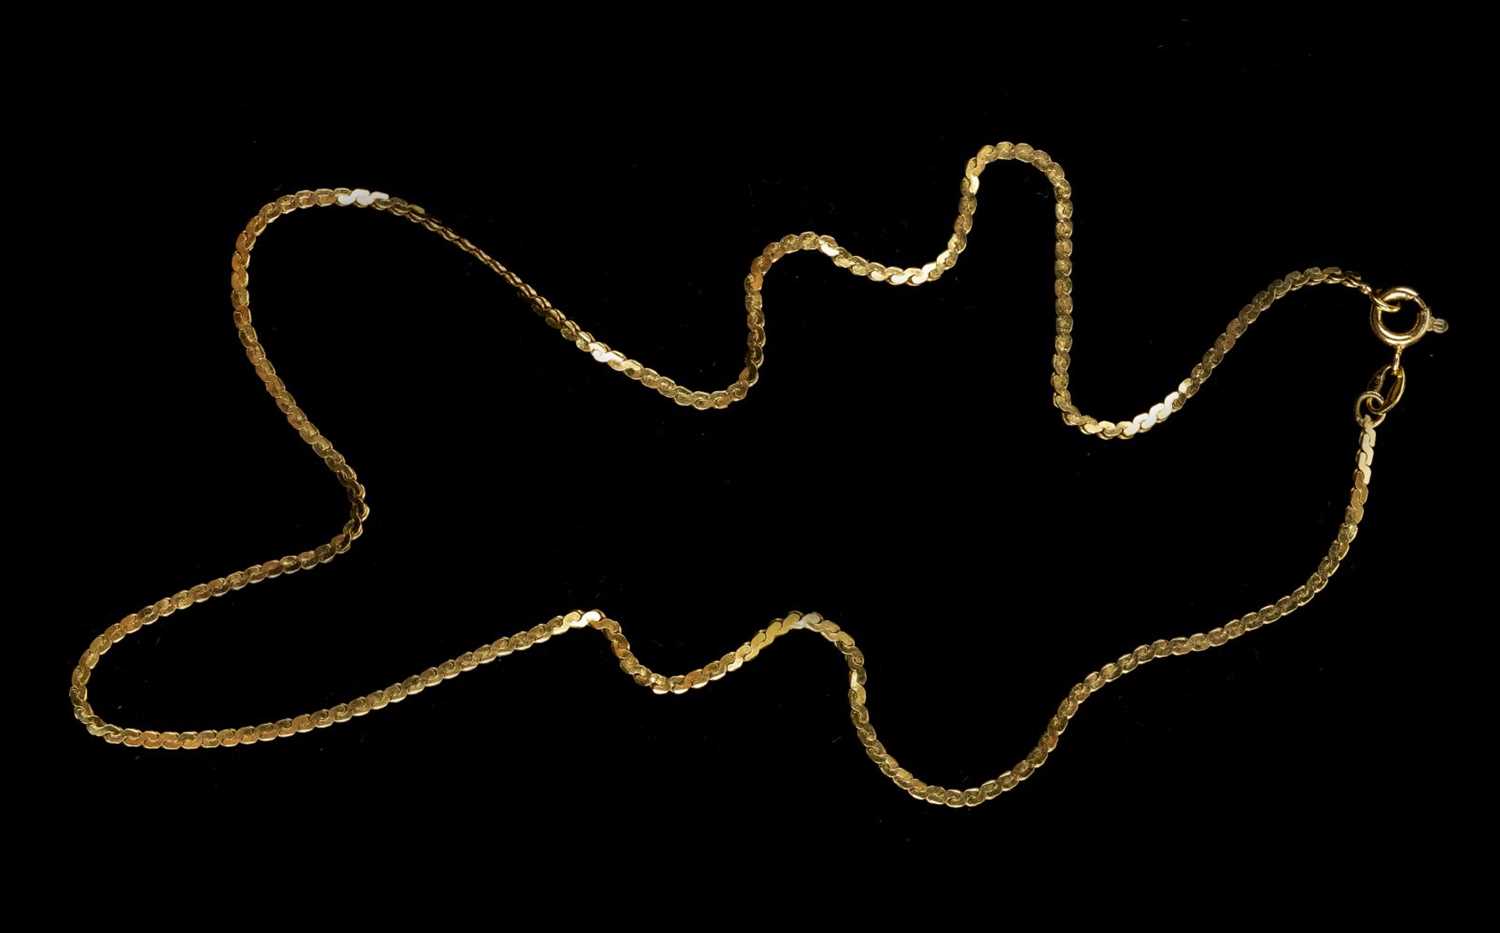 Lot 16 - Necklace. A Continental 18ct gold necklace